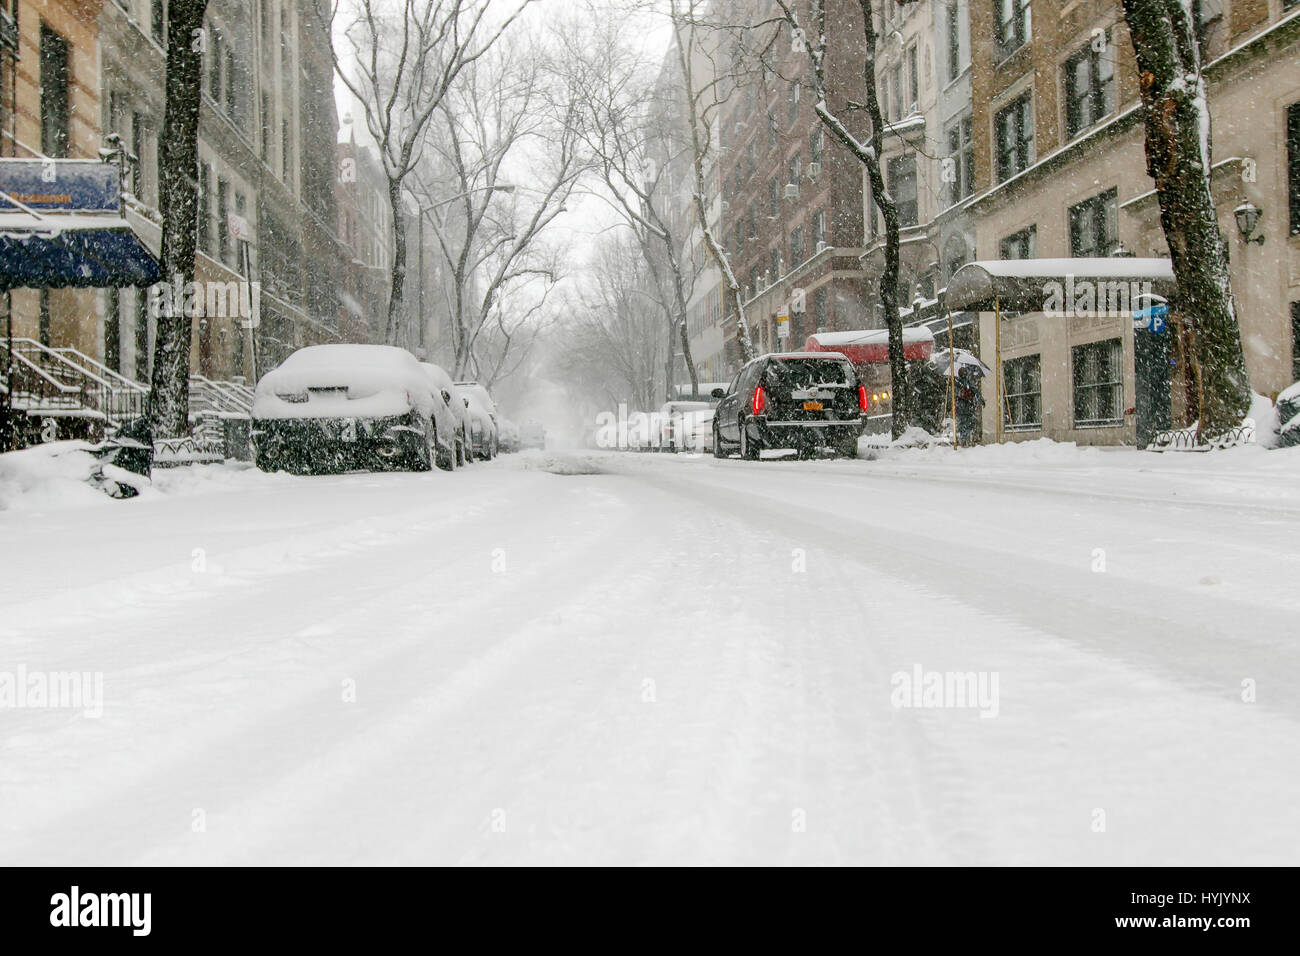 New York City residential street during a snowfall. Stock Photo